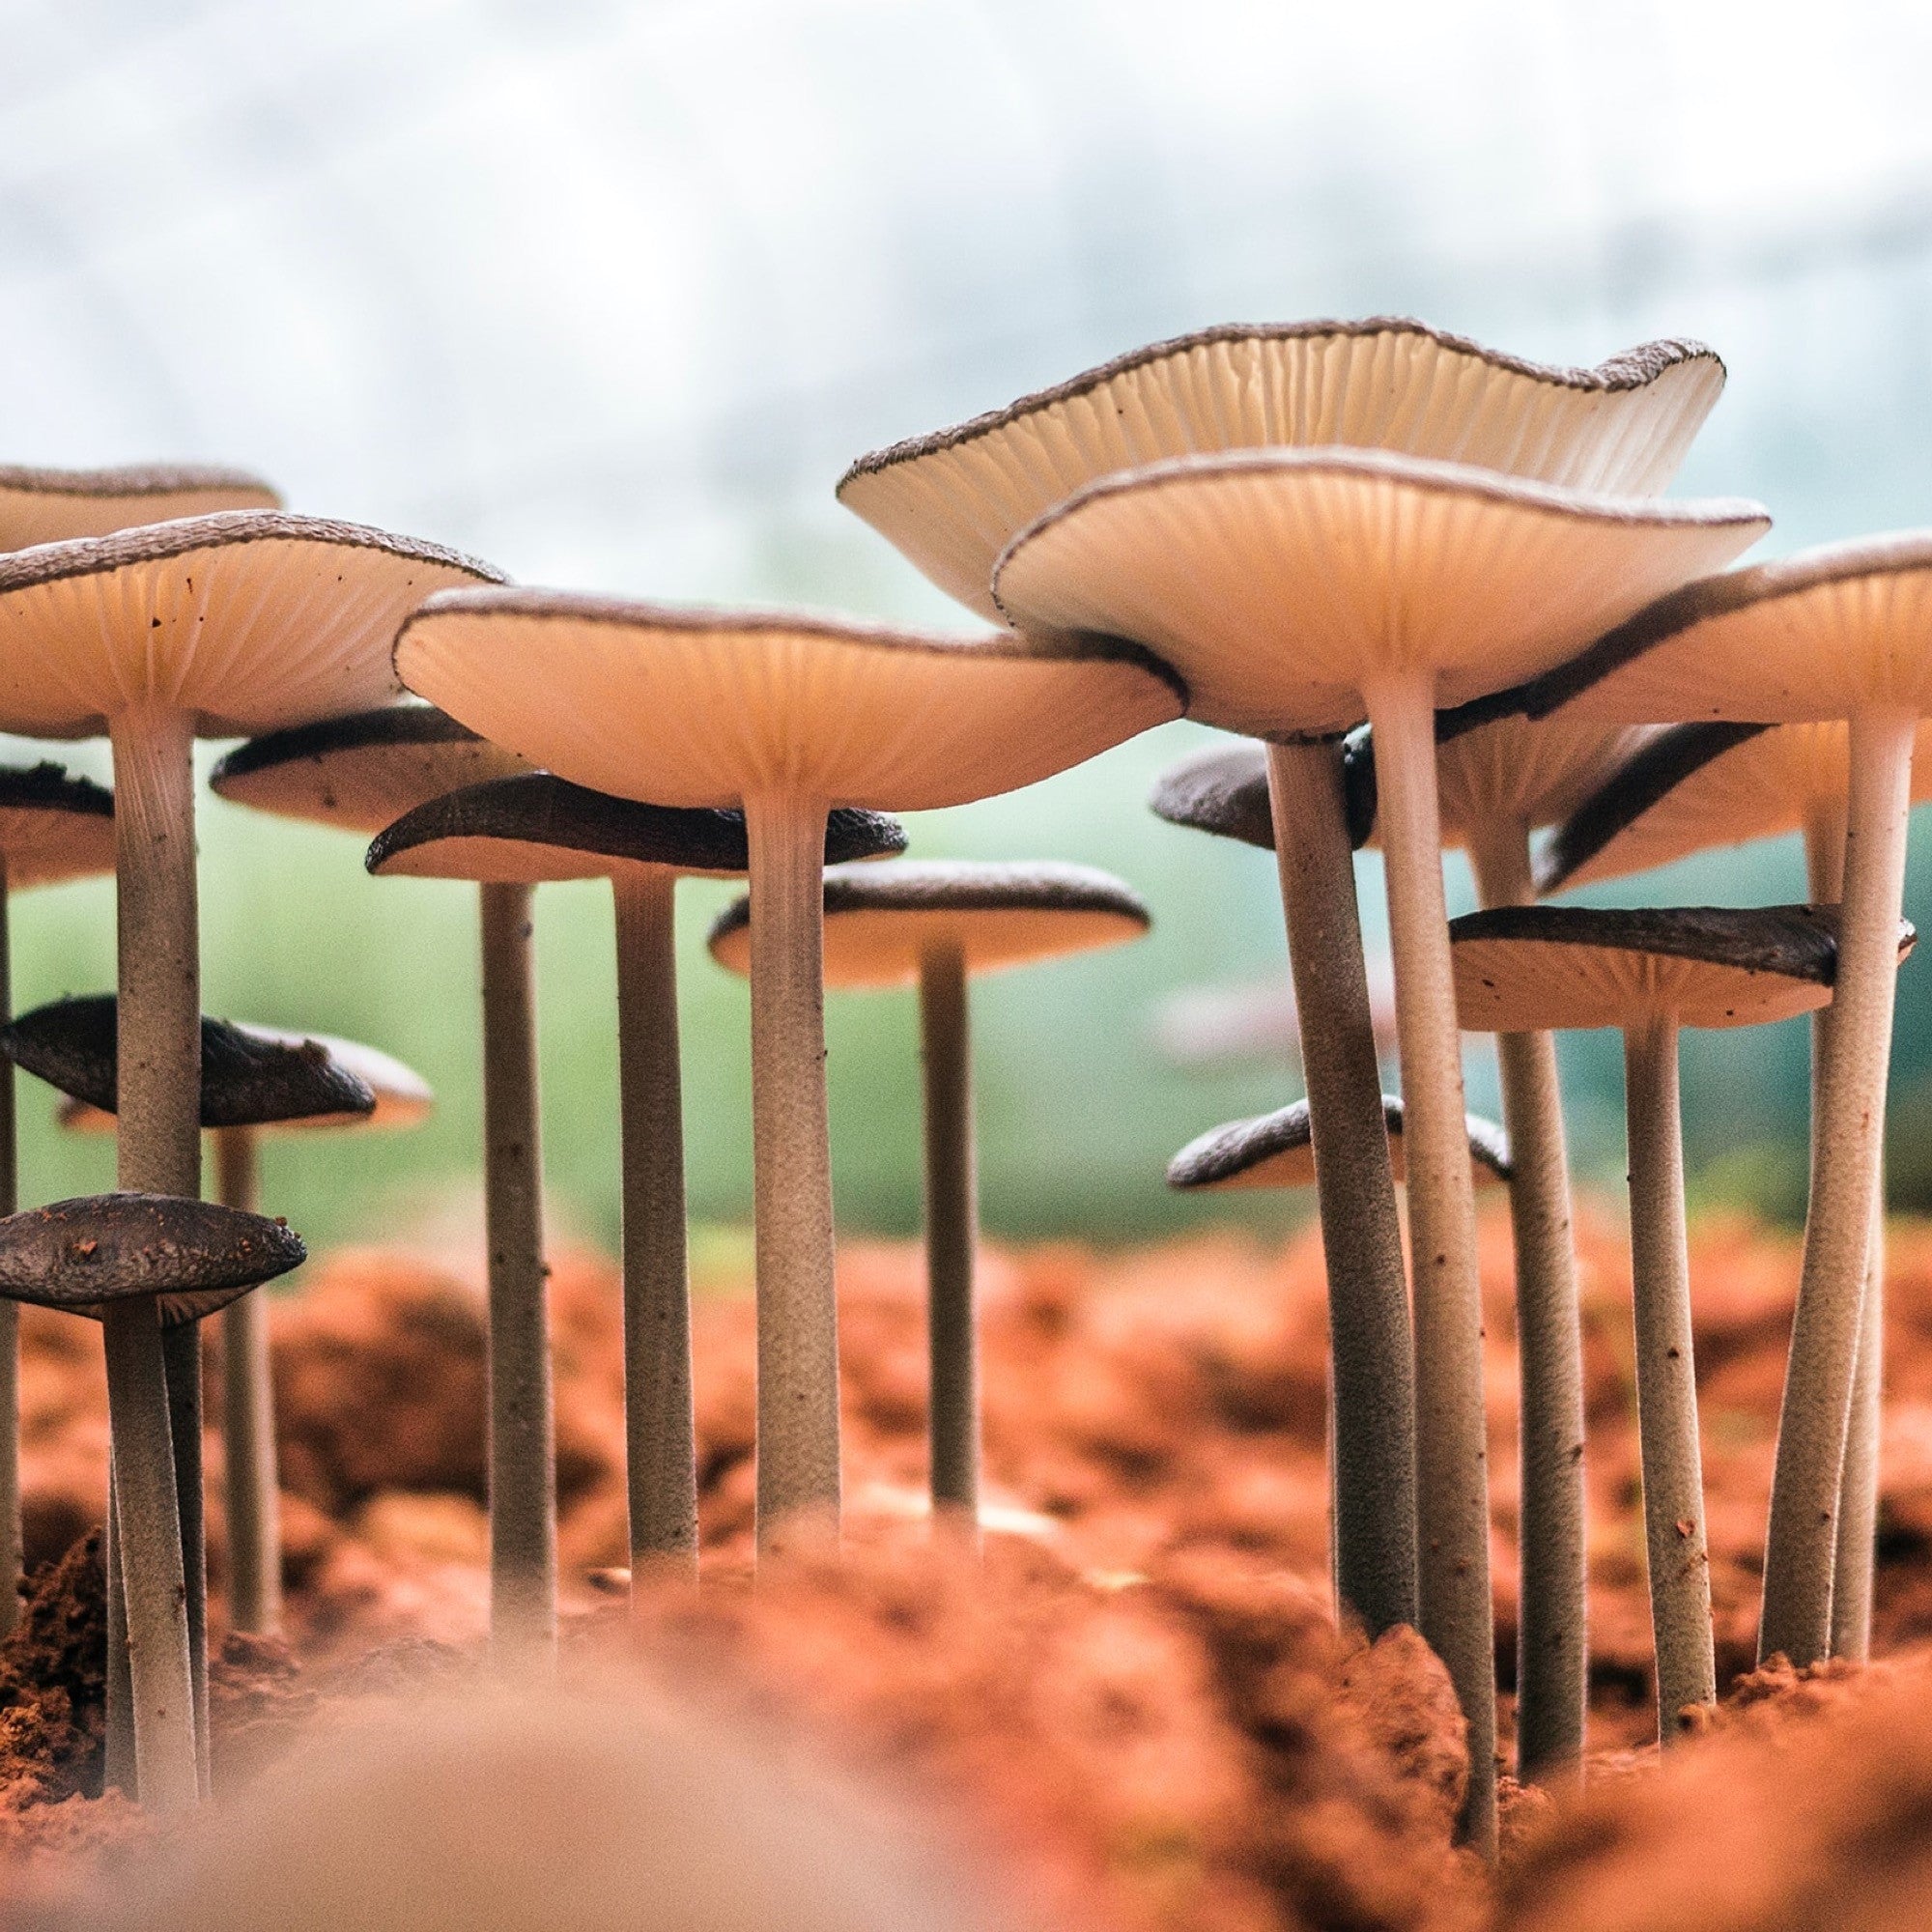 What's New in the World of Mushrooms